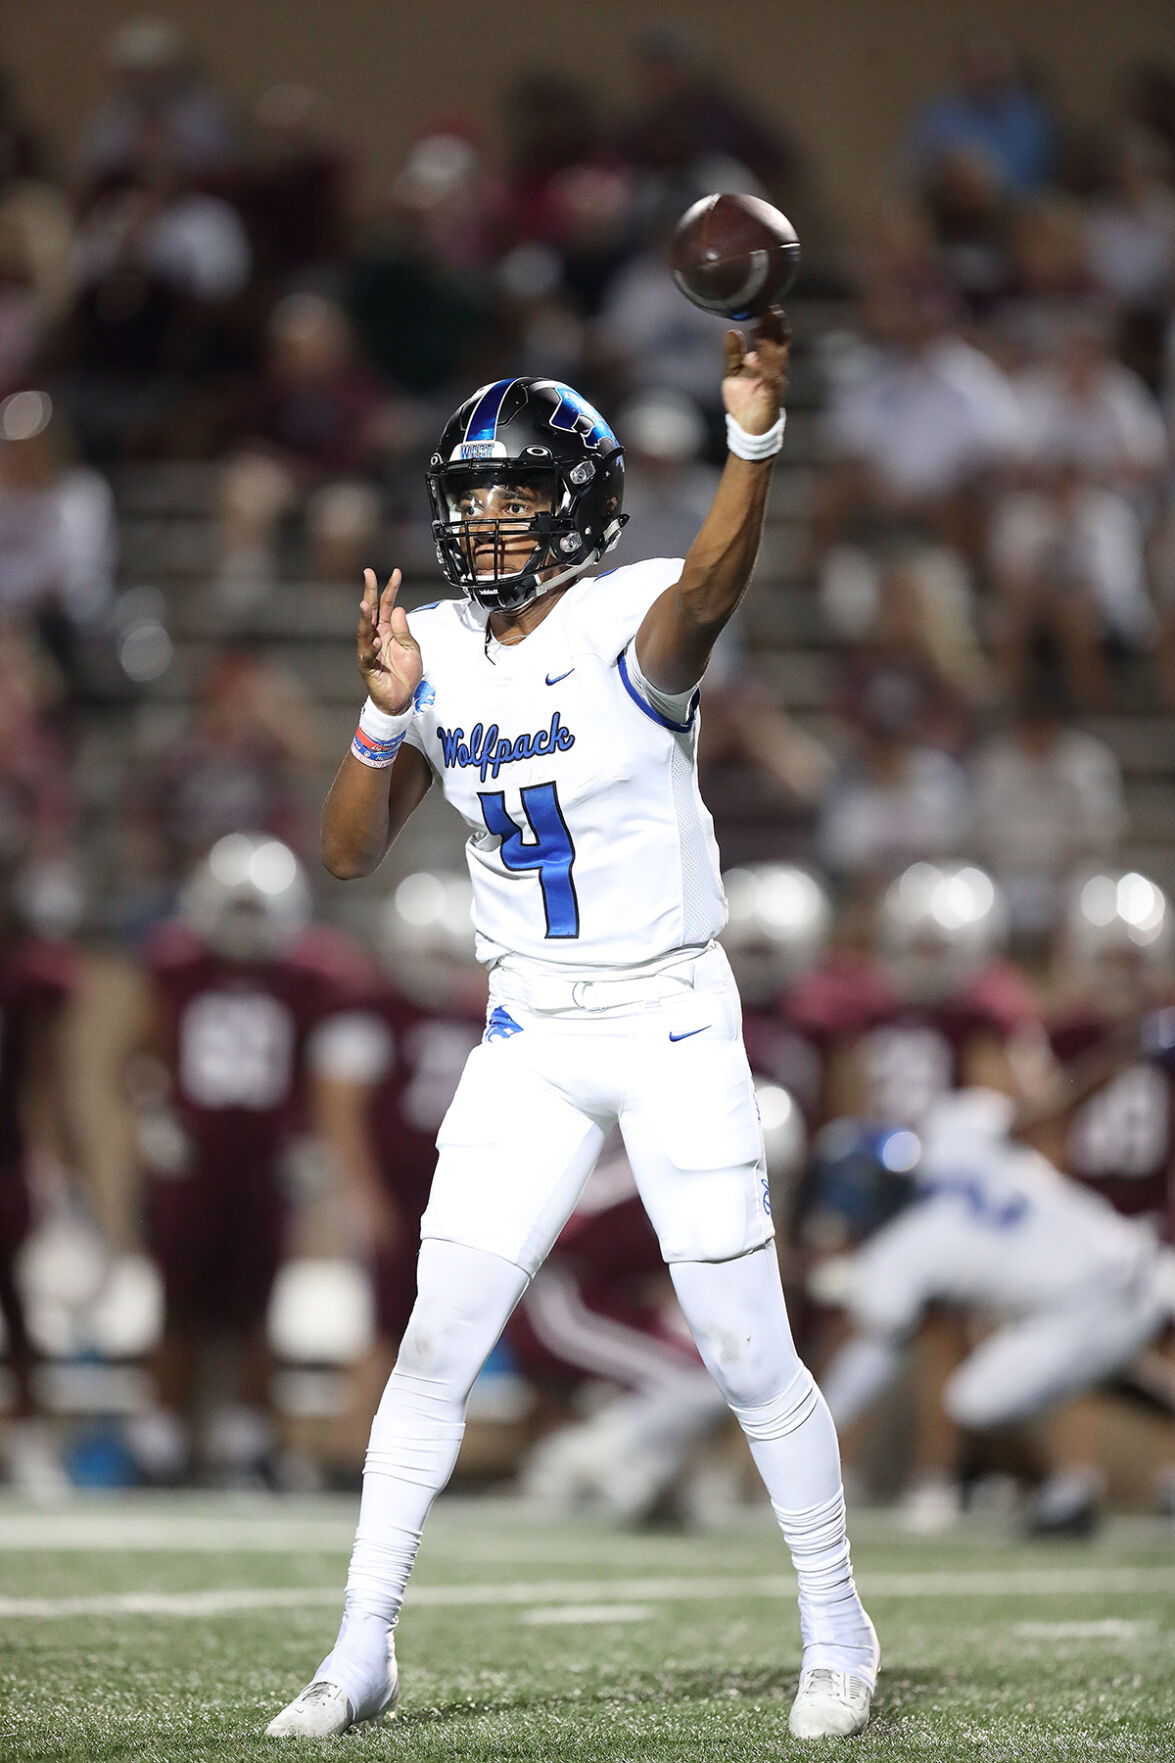 Plano West’s Jordan Grant Leads Team to First Win with Two Fourth-Quarter Touchdowns